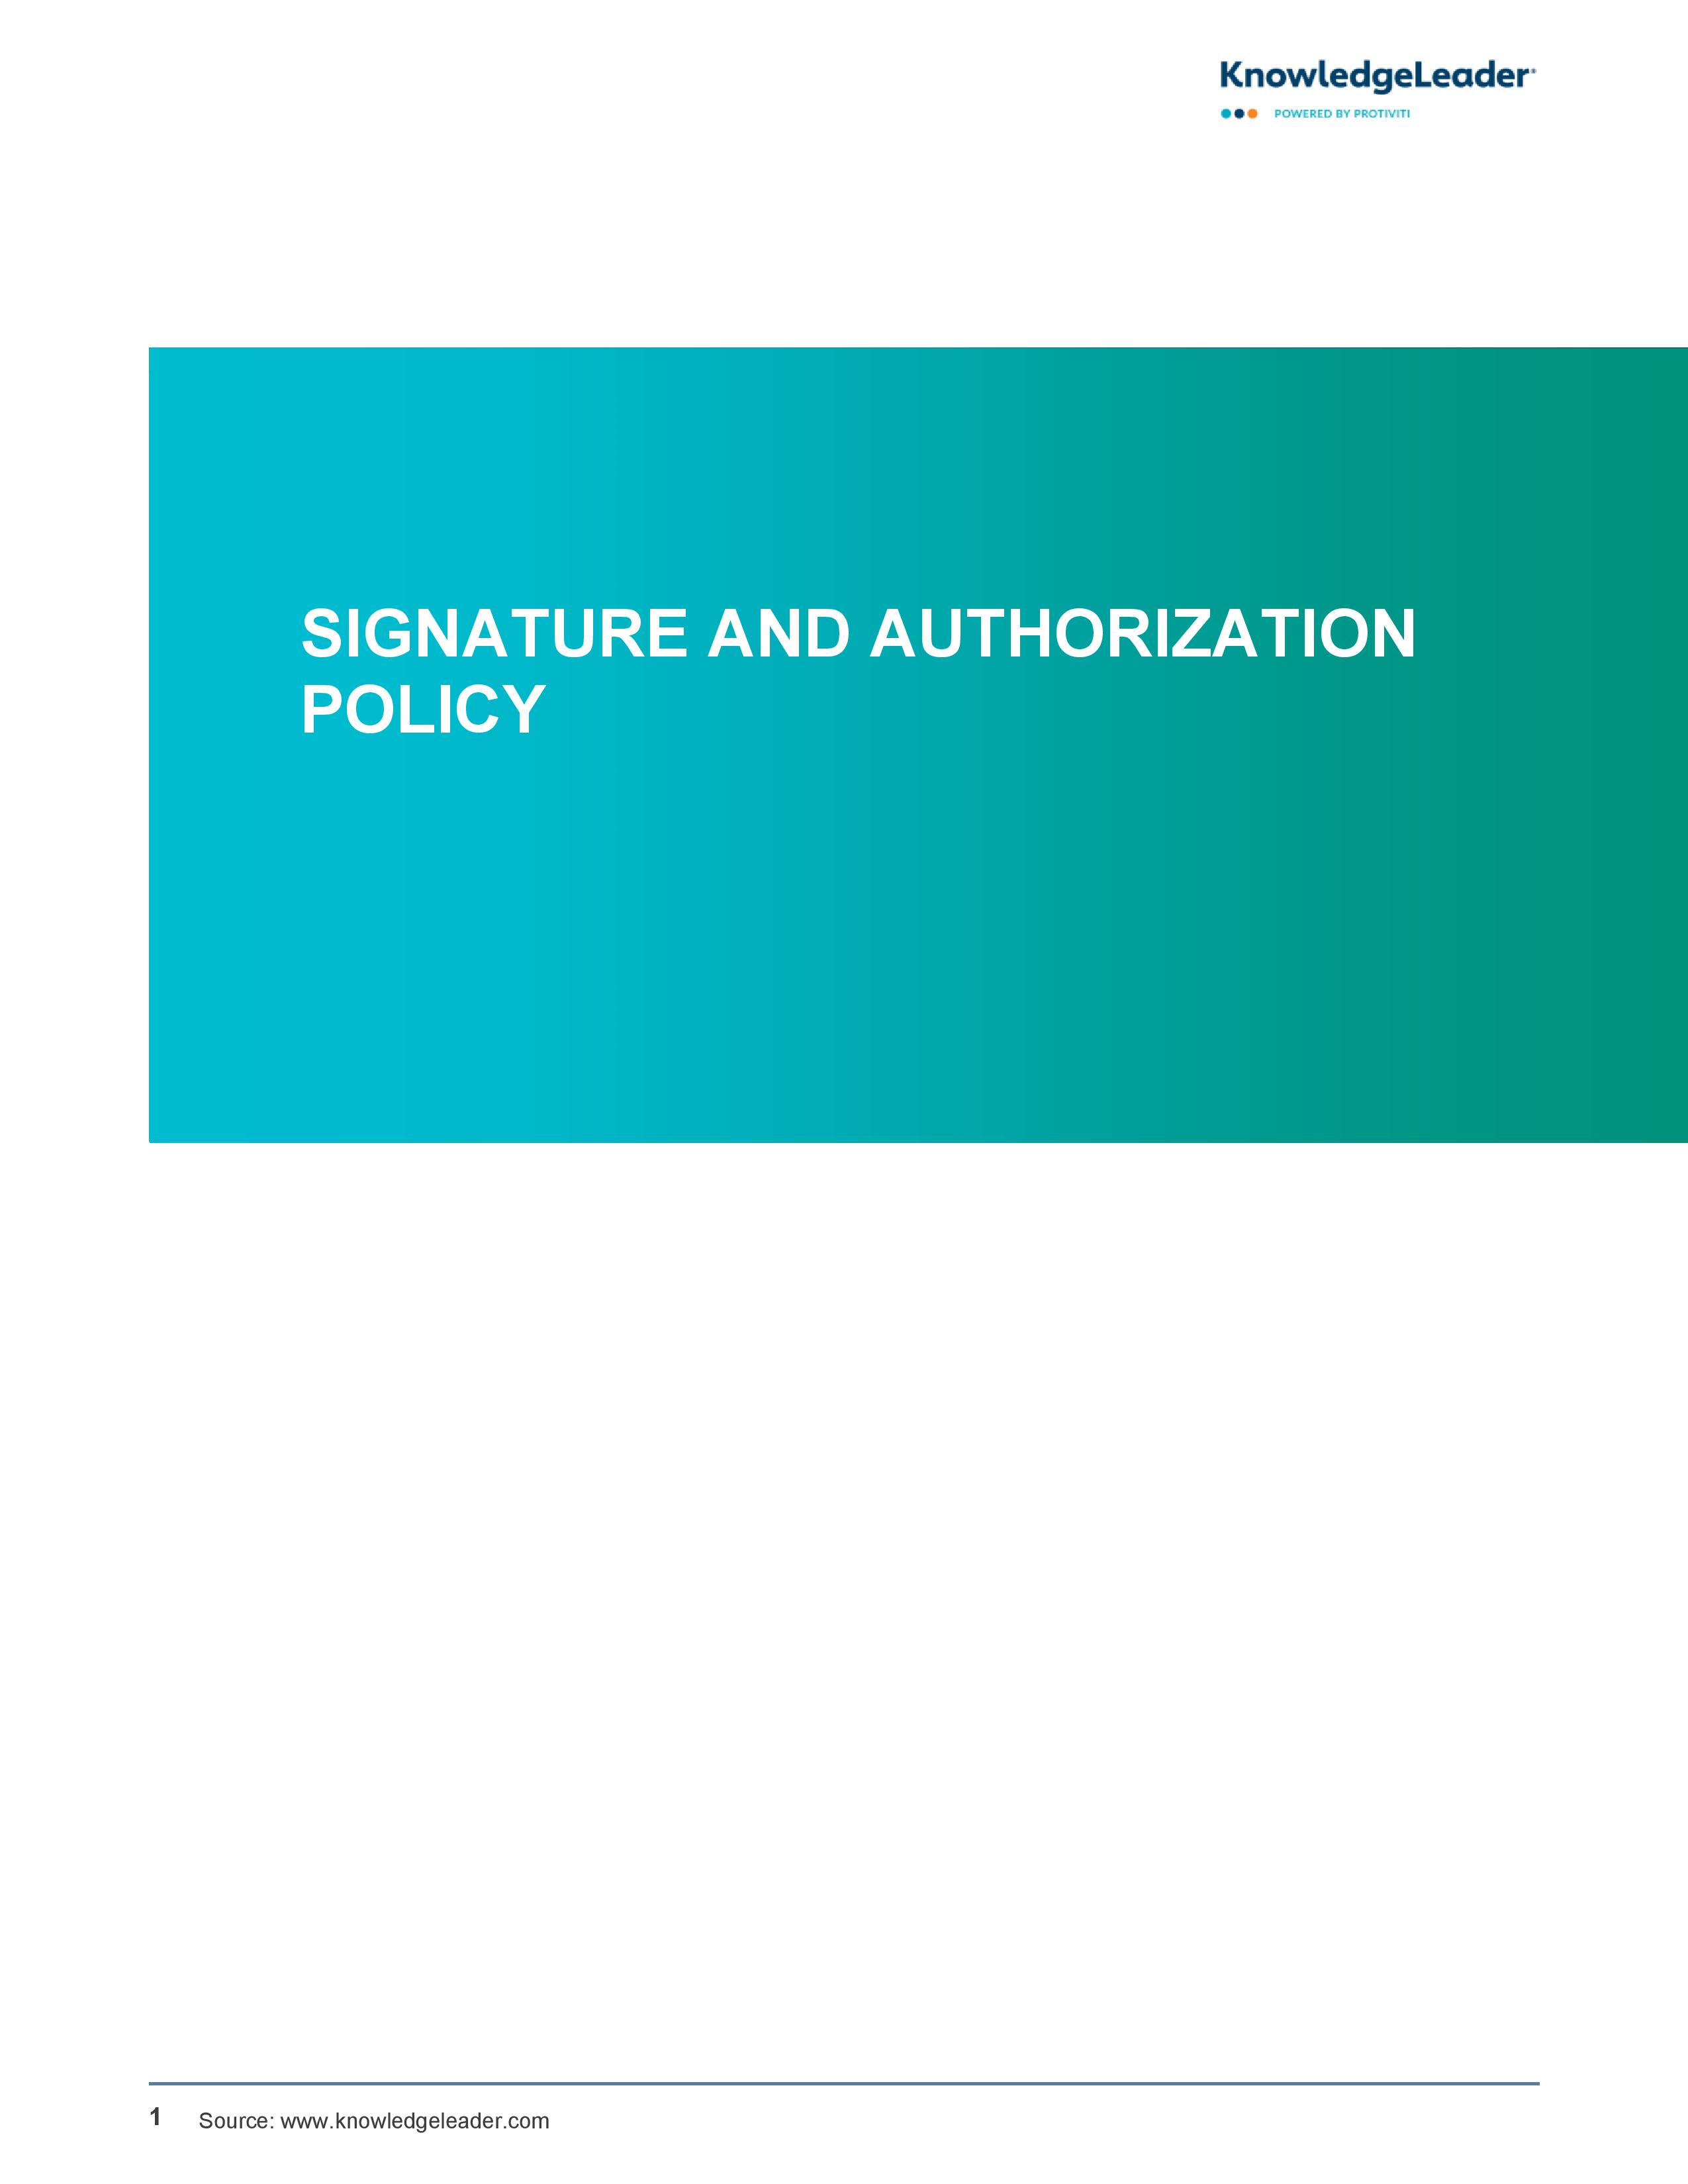 Screenshot of the first page of Signature and Authorization Policy